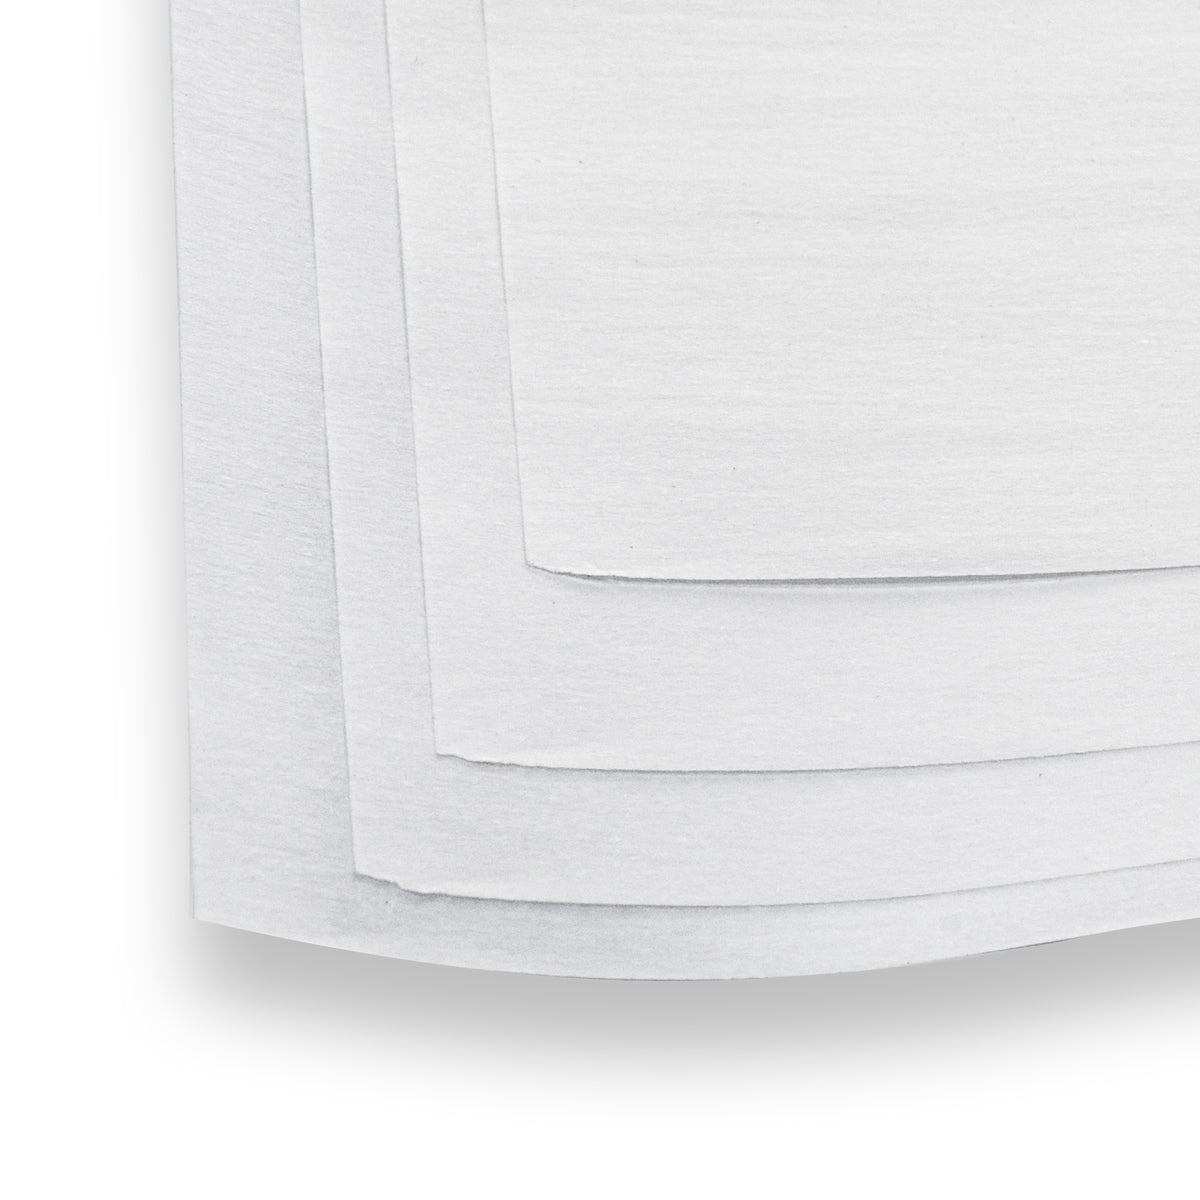  Rzam Rosin Parchment Paper, Super Thick and Slick, 6 X 12, 100 Sheets